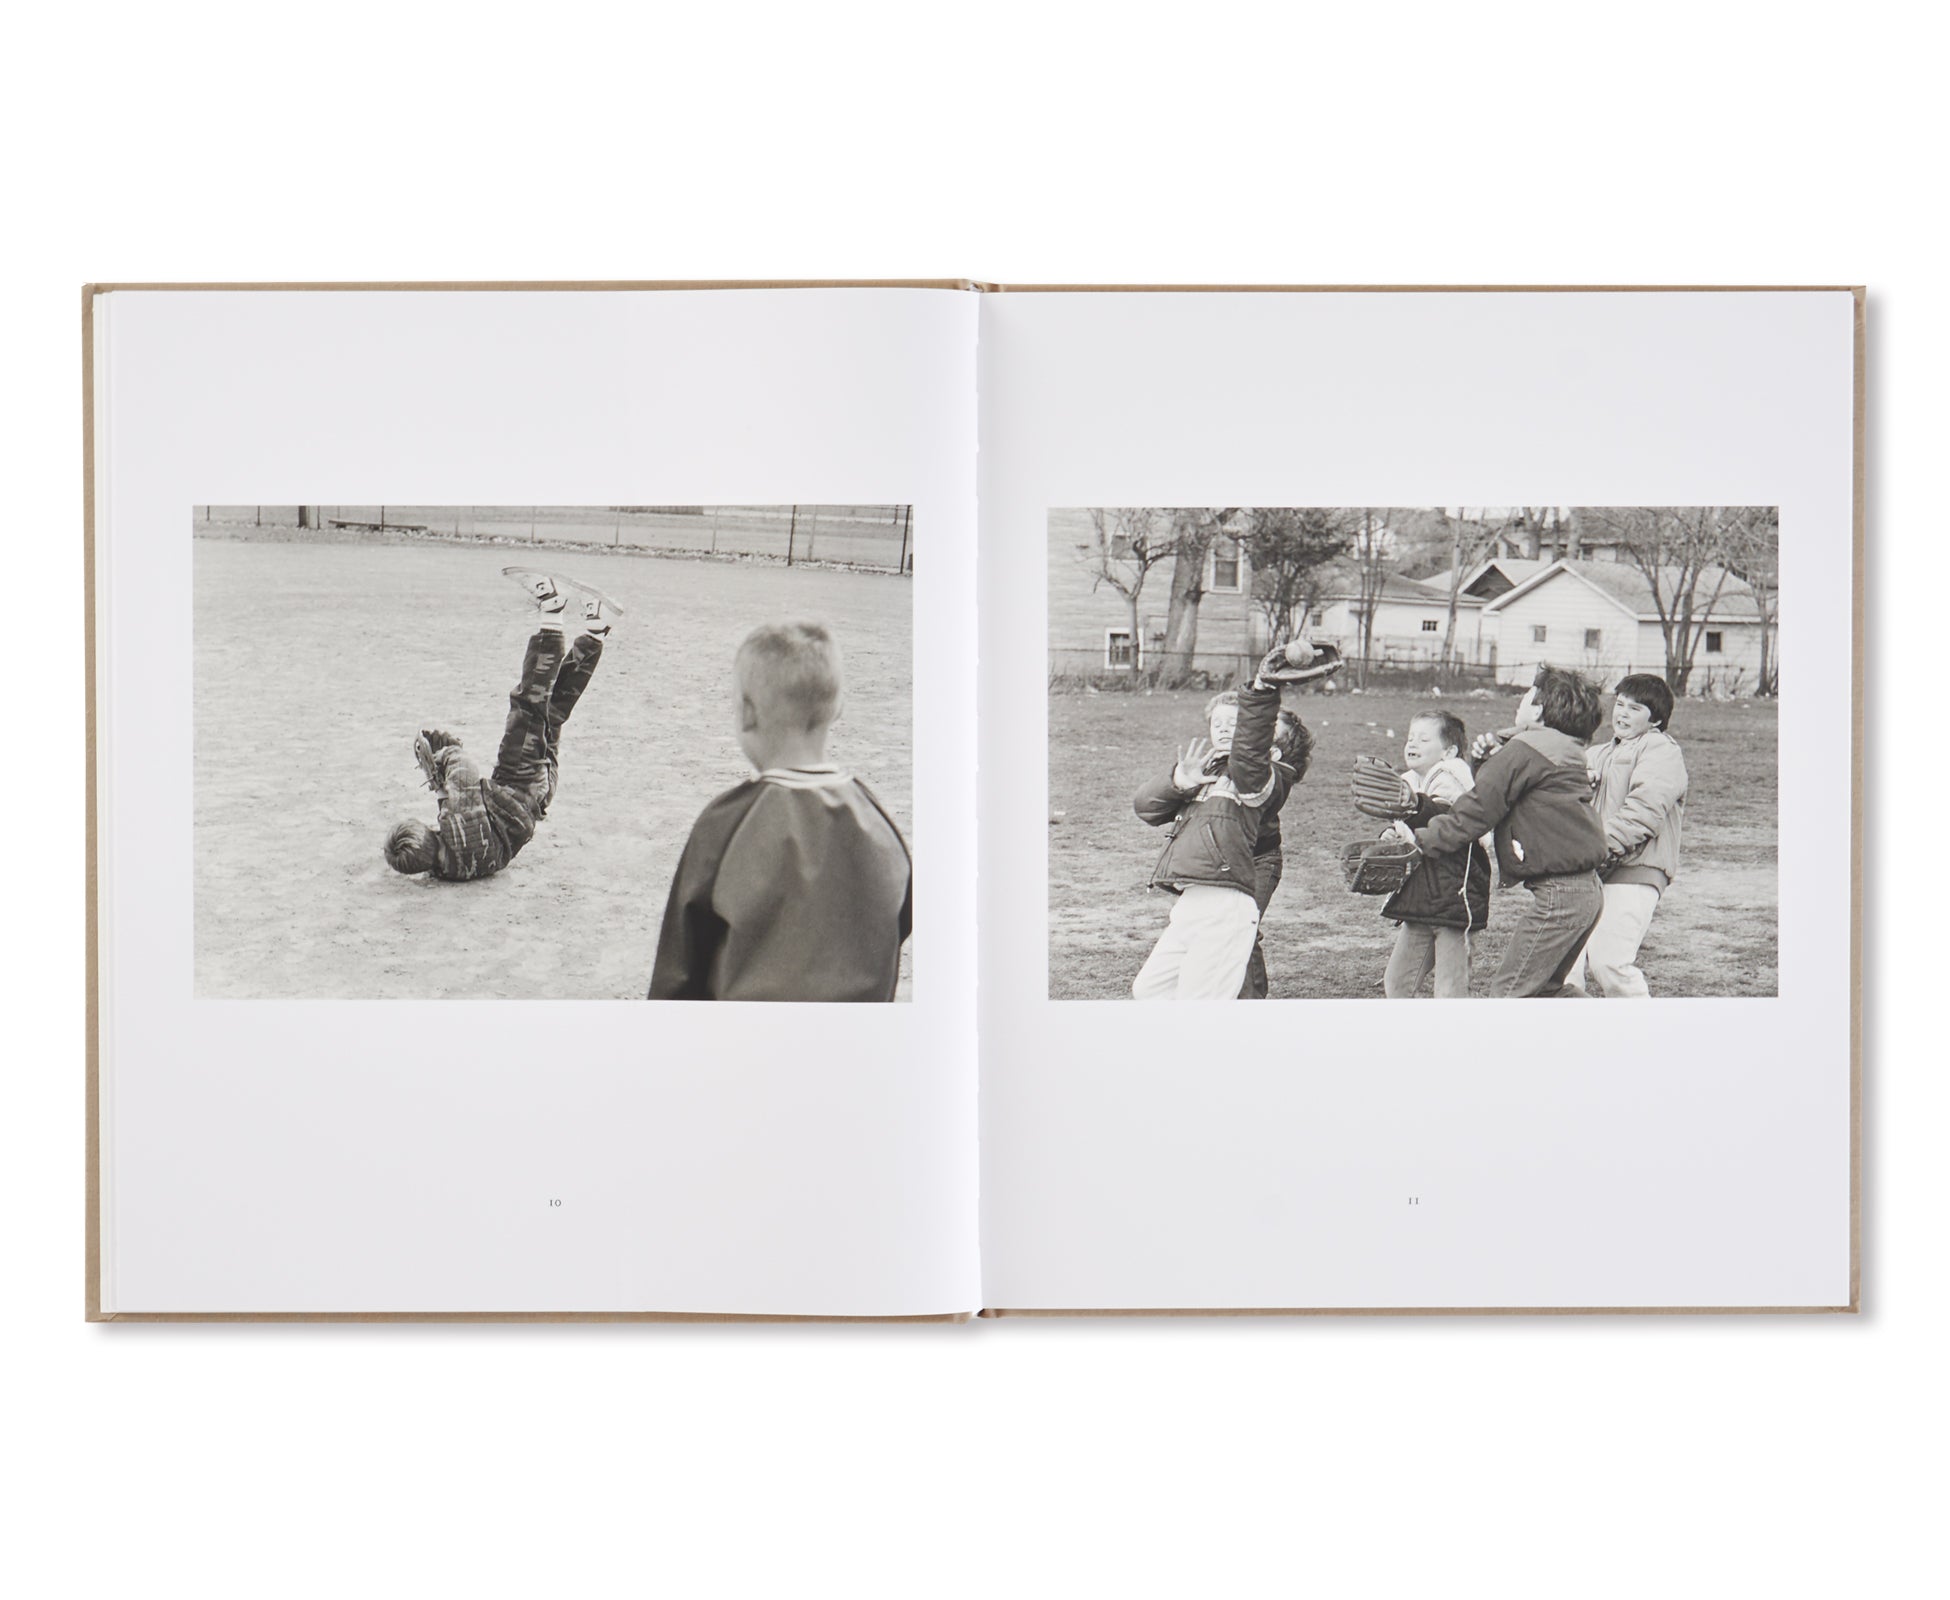 THE PLAYERS by Mark Steinmetz